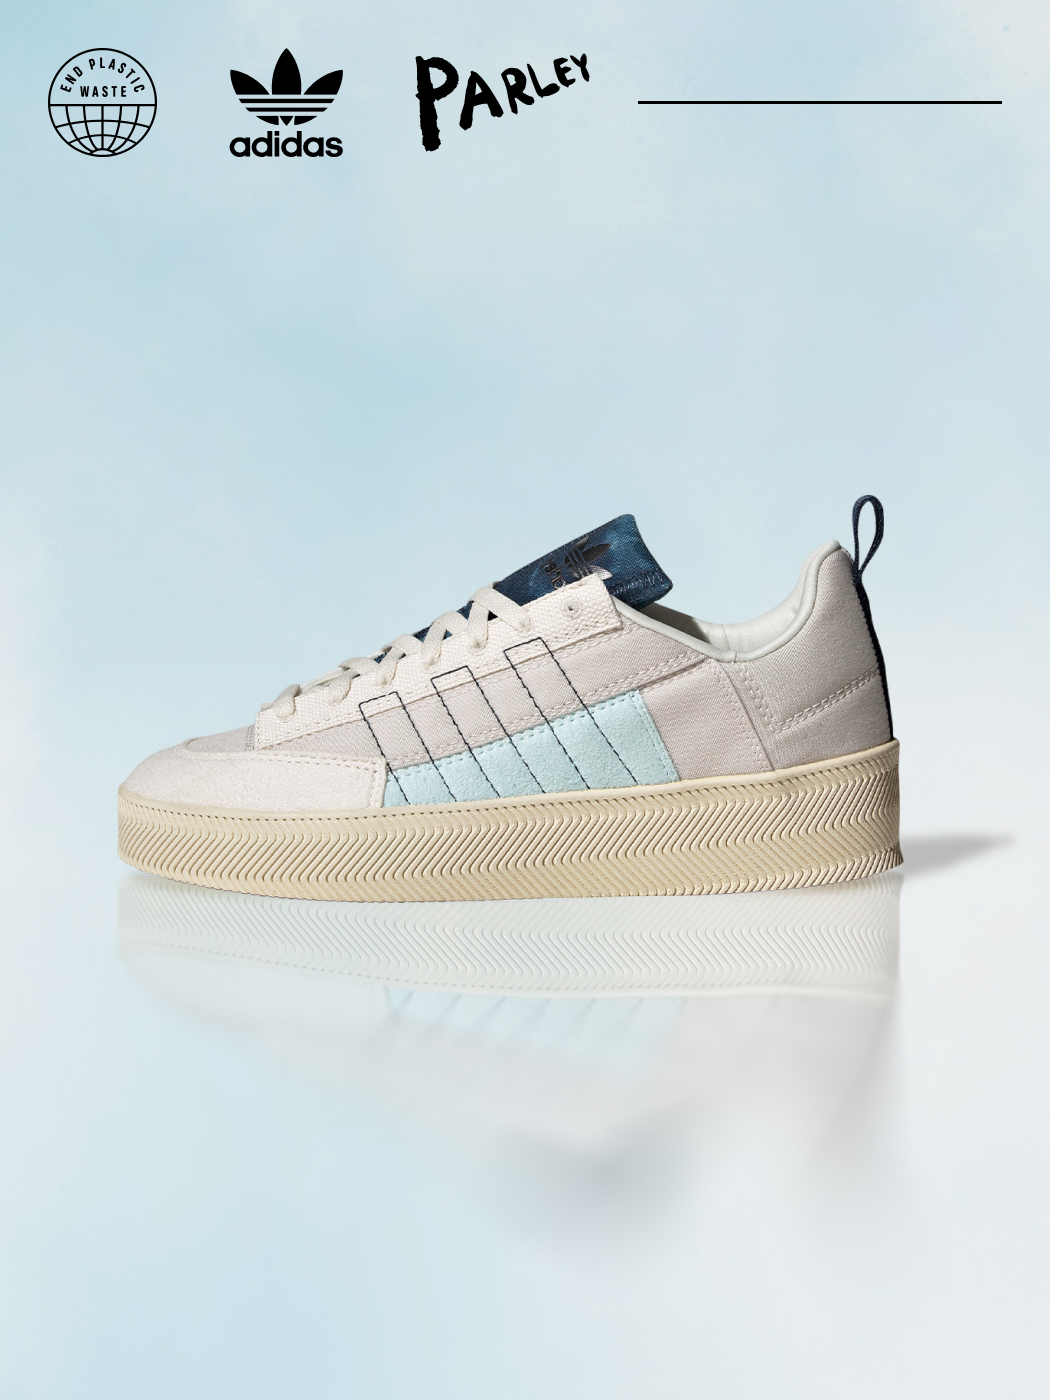 The Nizza sneaker in white with light blue 3-stripes and dark blue tongue is pictured from the side on a light blue background.